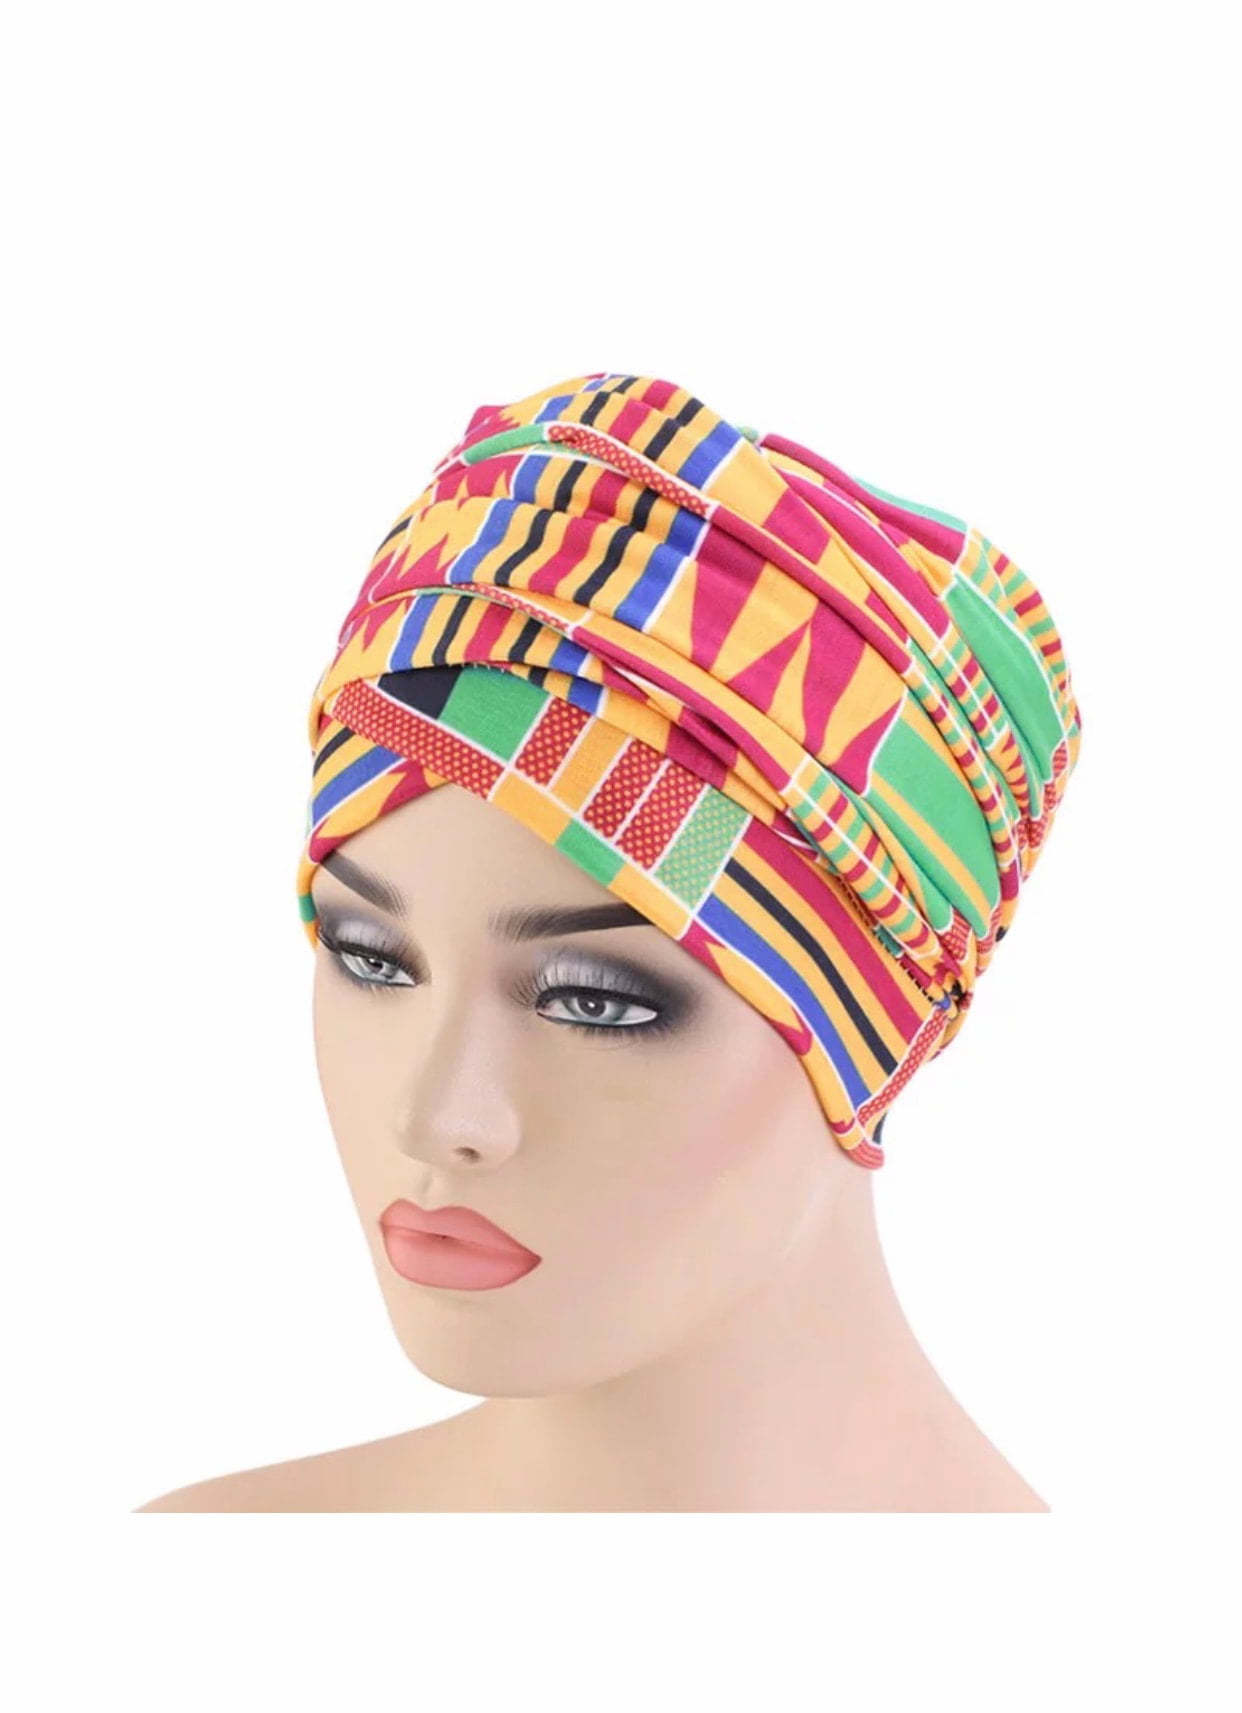 Ready to wear Burdungy Color Turbans for women Head wraps for women One size,3 ways to wear 